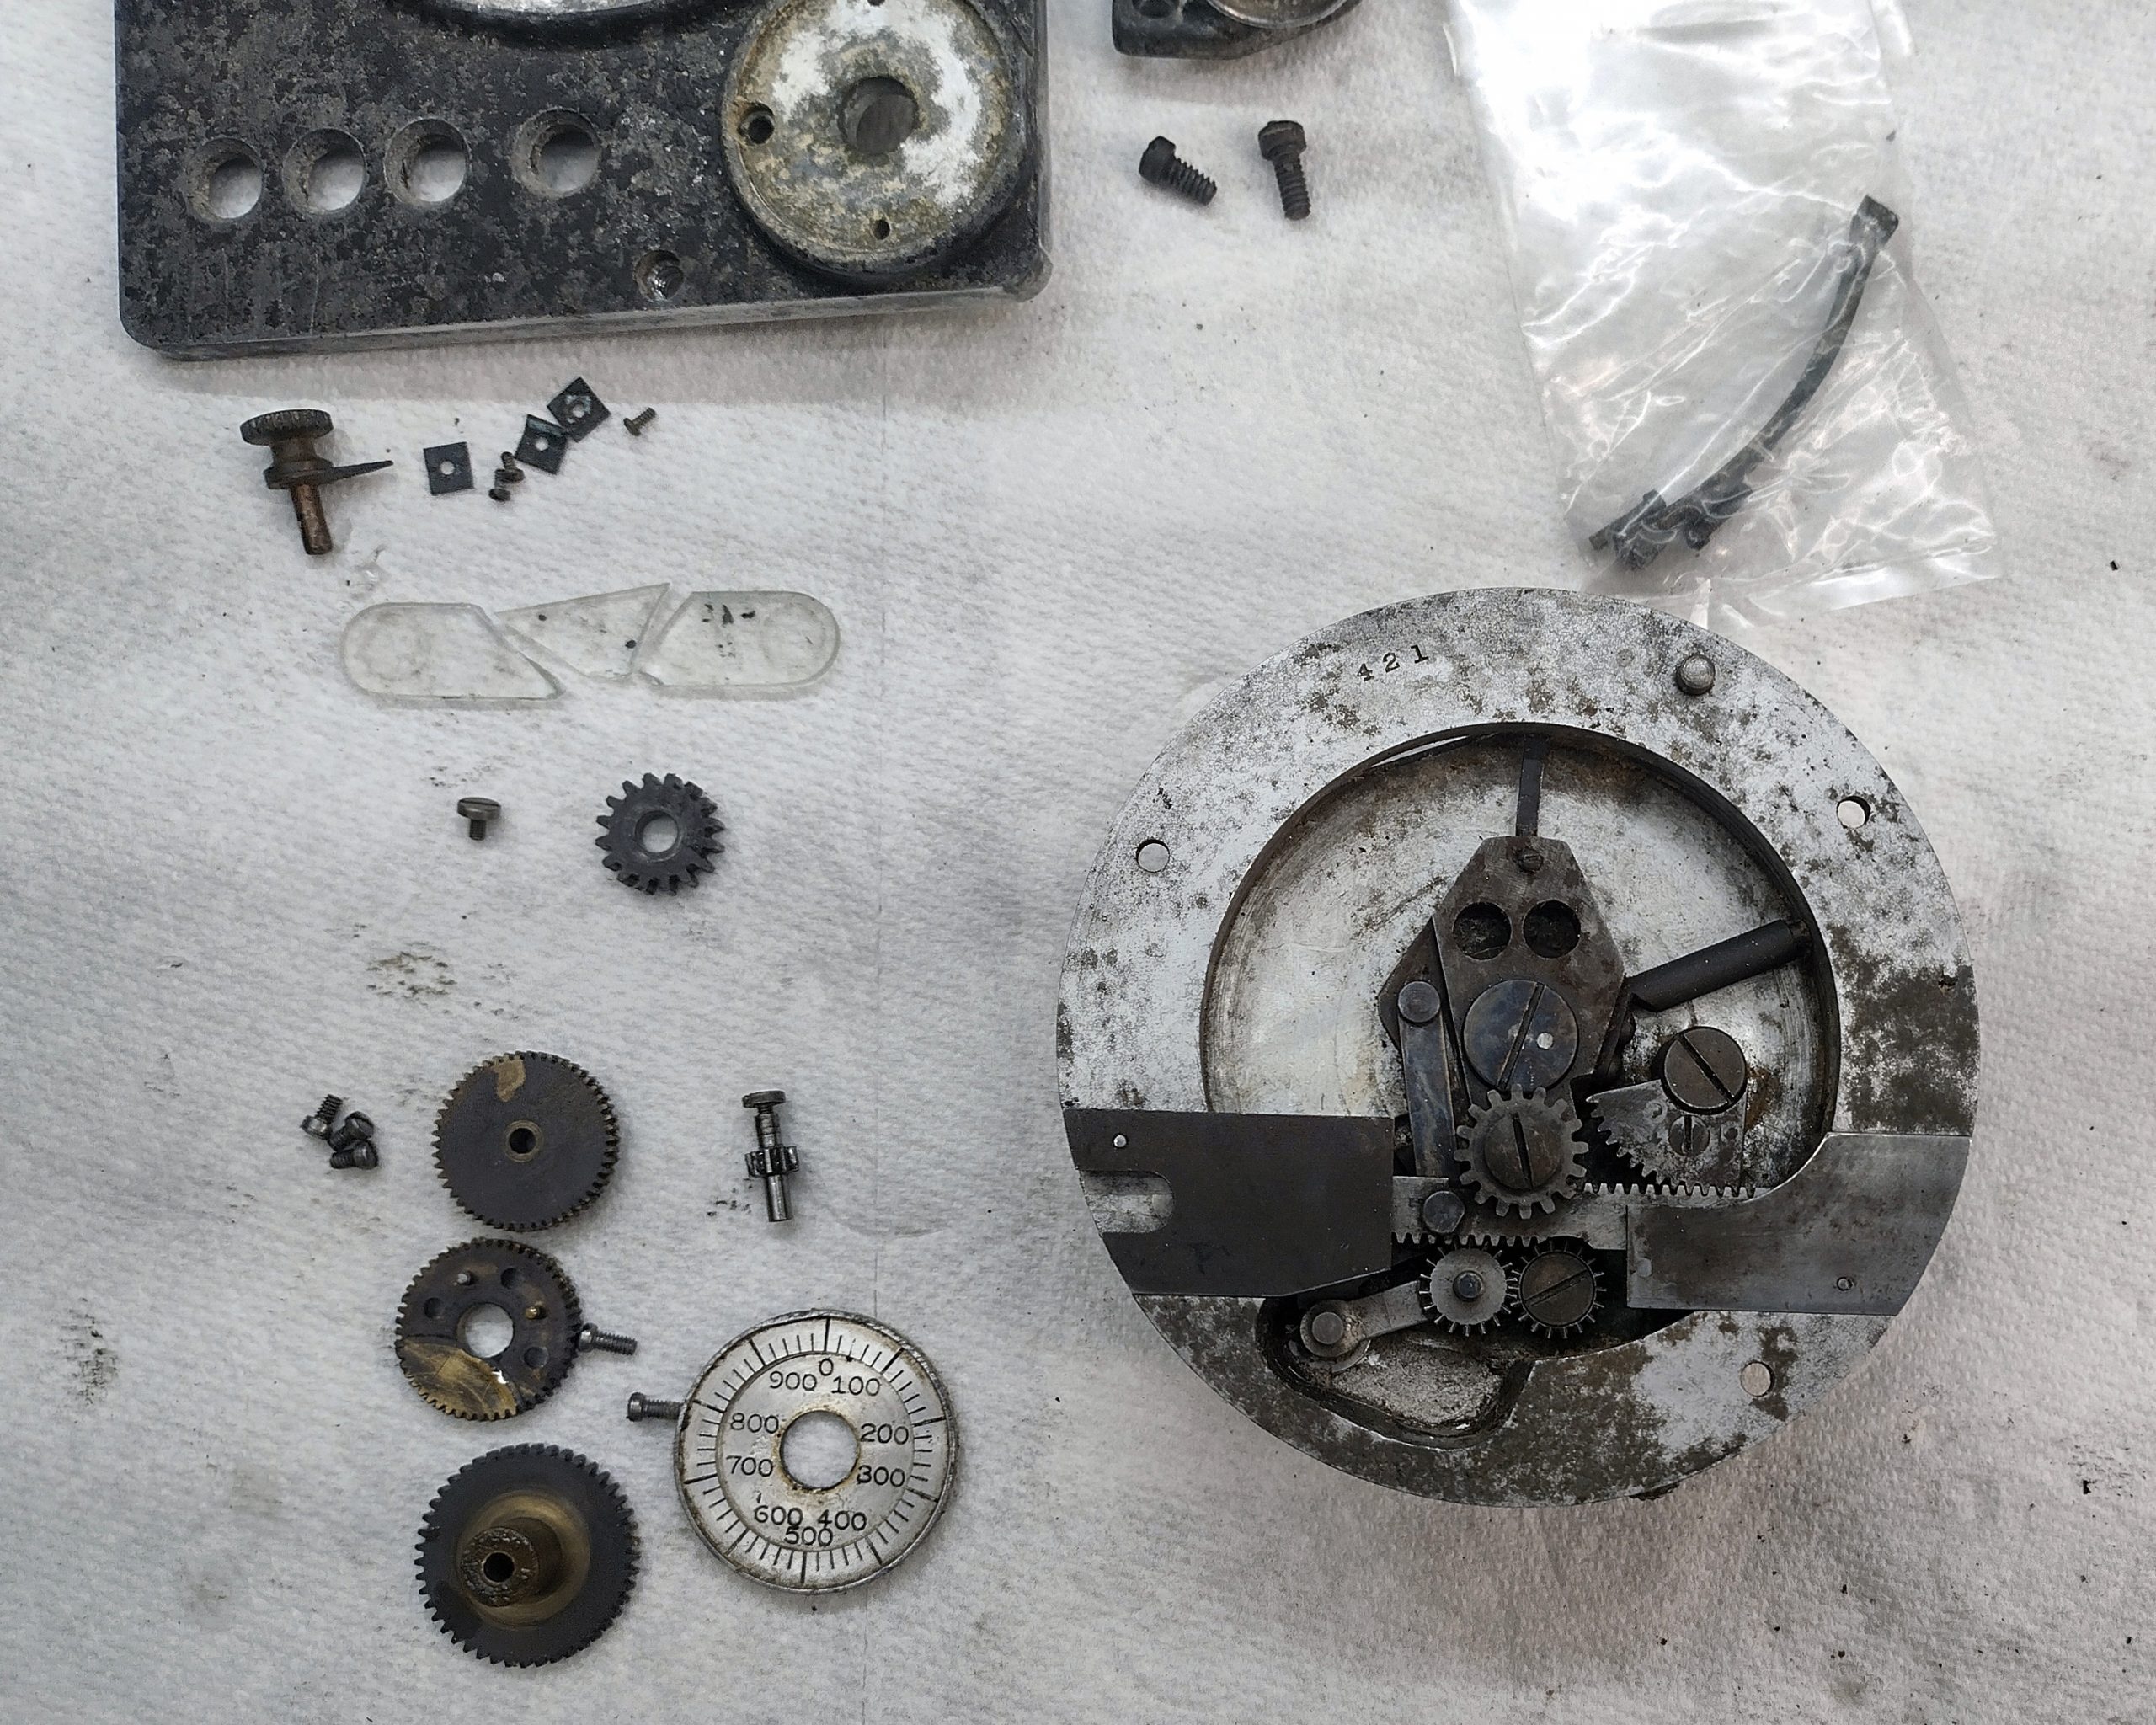 Mitchell Standard 46 - replacment back plate disassembled, with the dissolved shutter control before repairs, as well as the Veeder Root foot frame counter and footage counter clock drive gears.